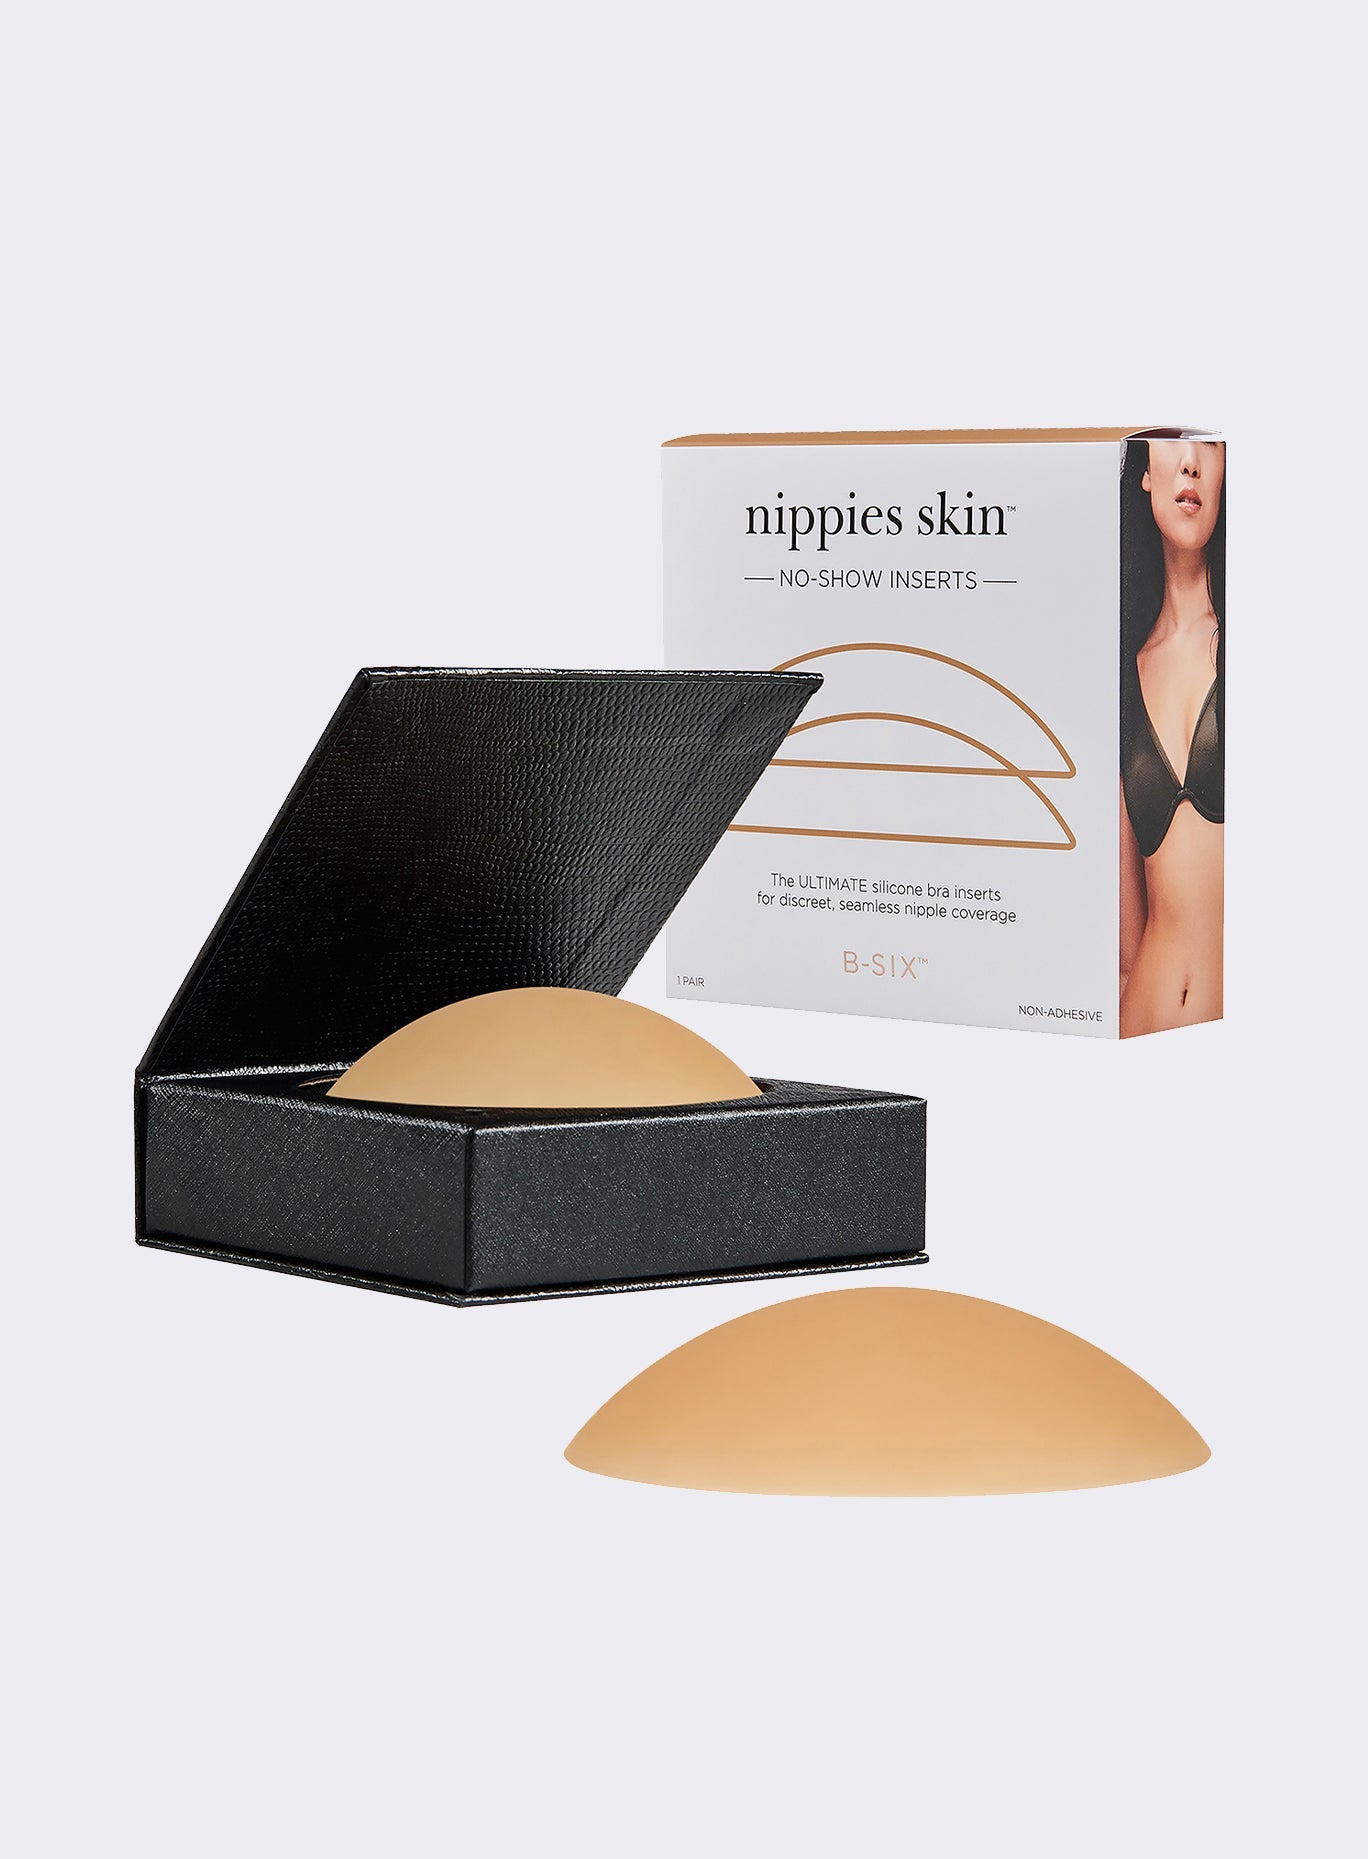 picture of nippies in caramel color along with the packaging box 